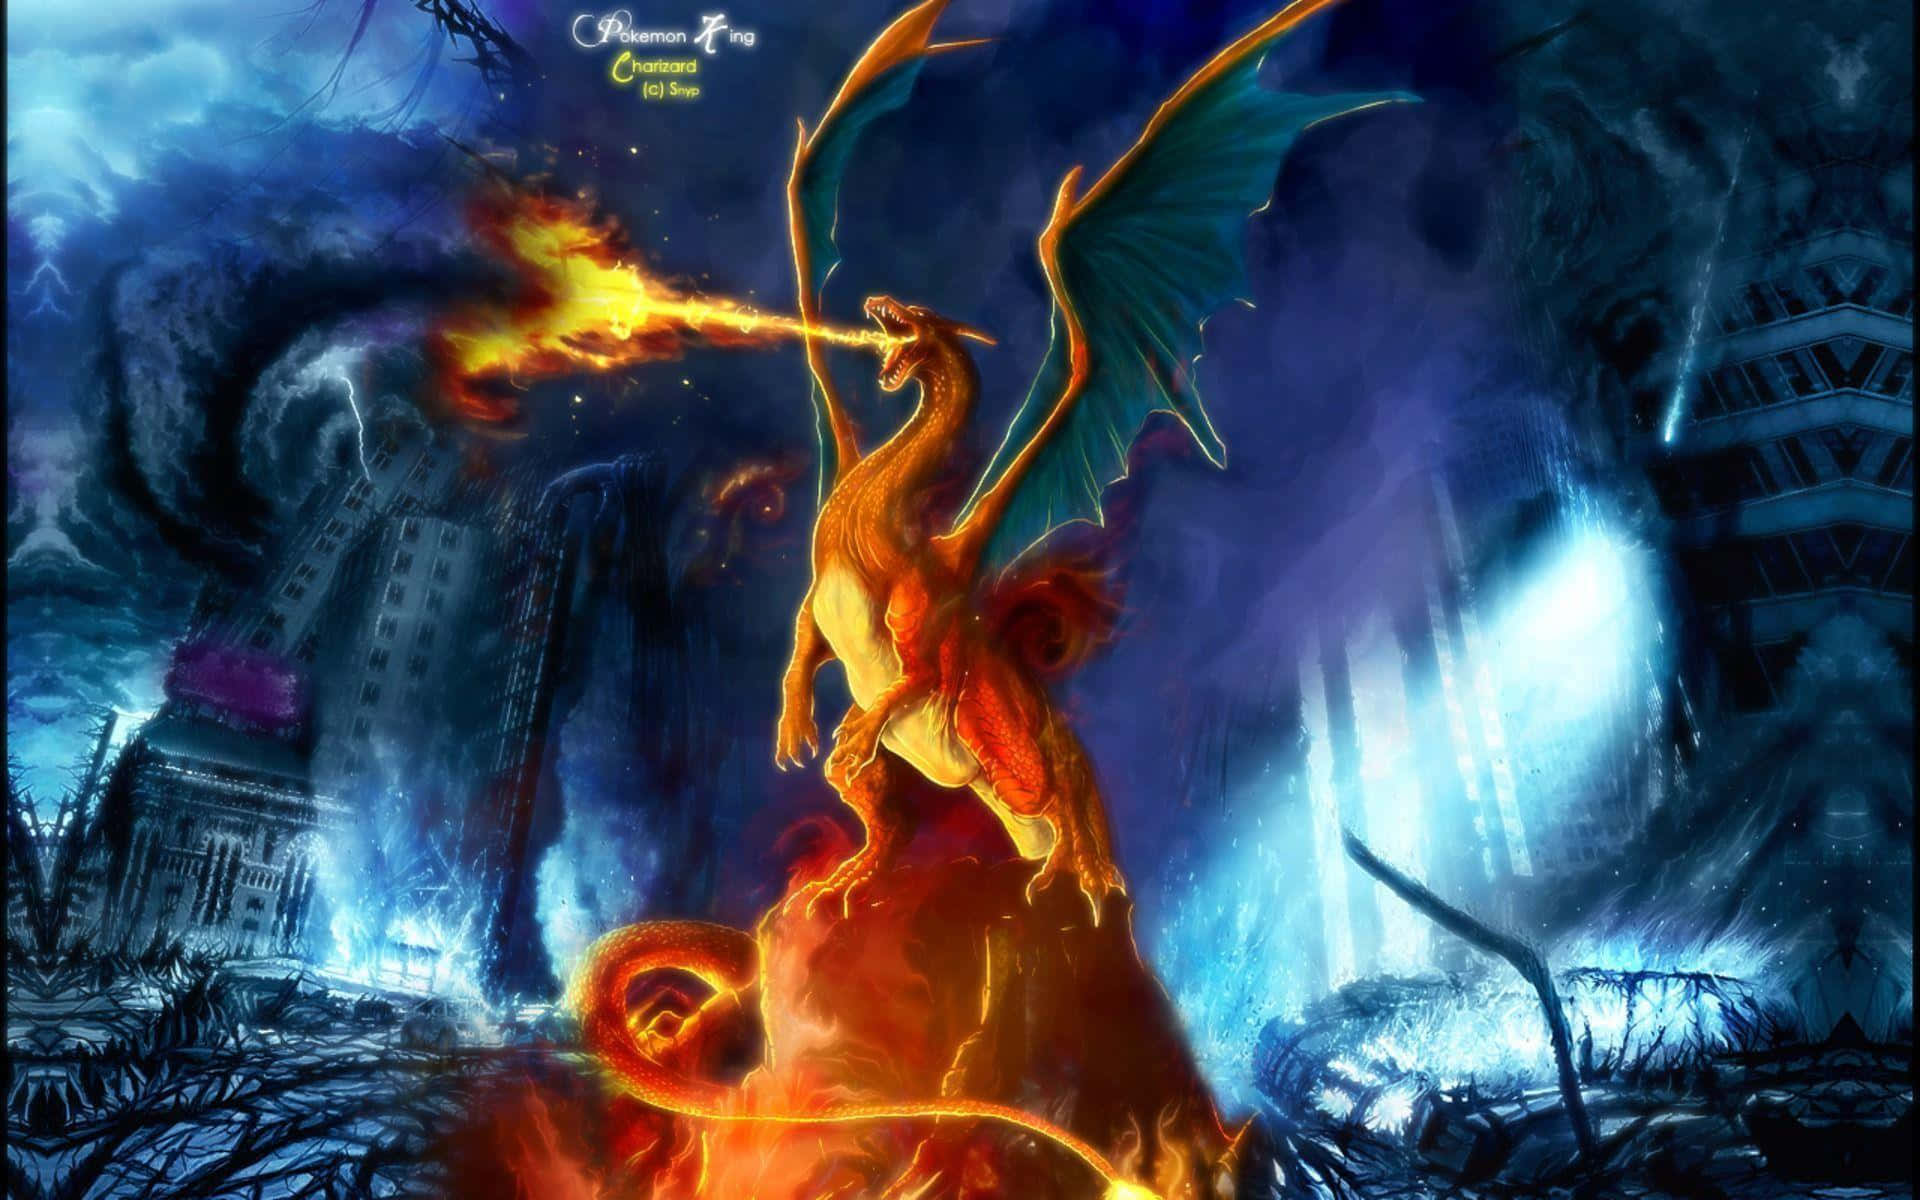 Charizard Flying Through a Magical Landscape